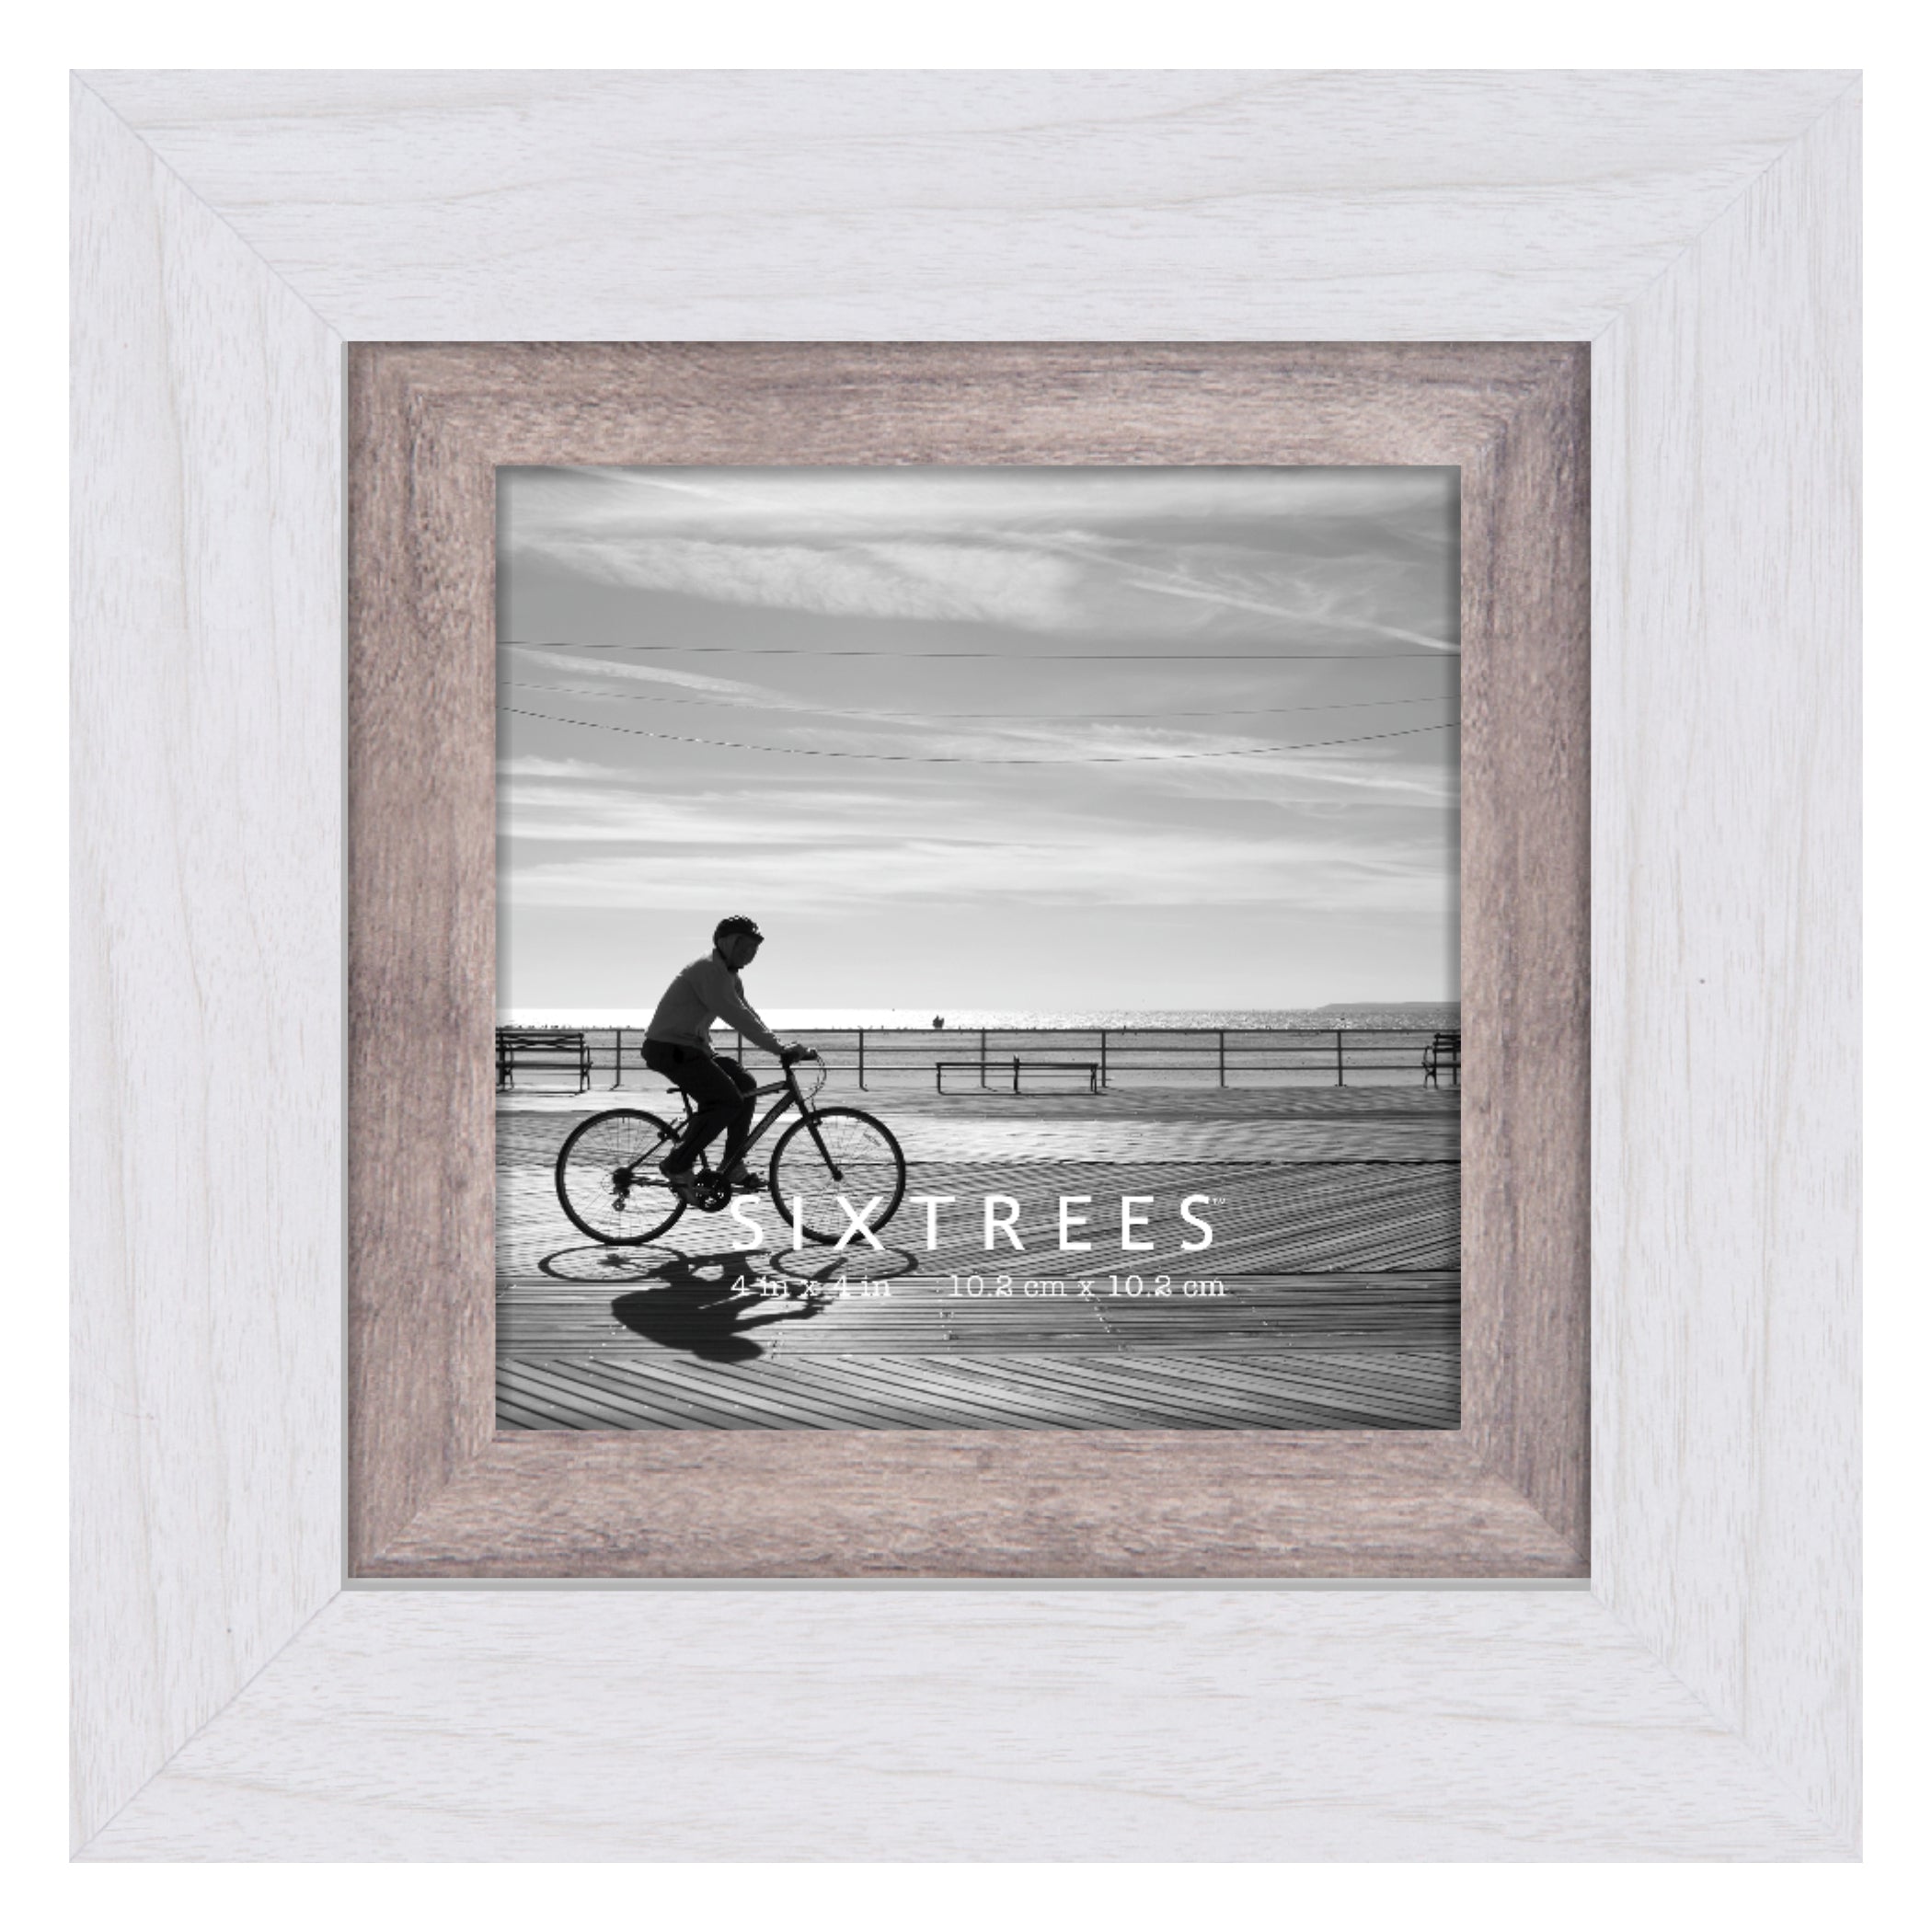 Family 4X6 Wood Picture Frame – Sixtrees